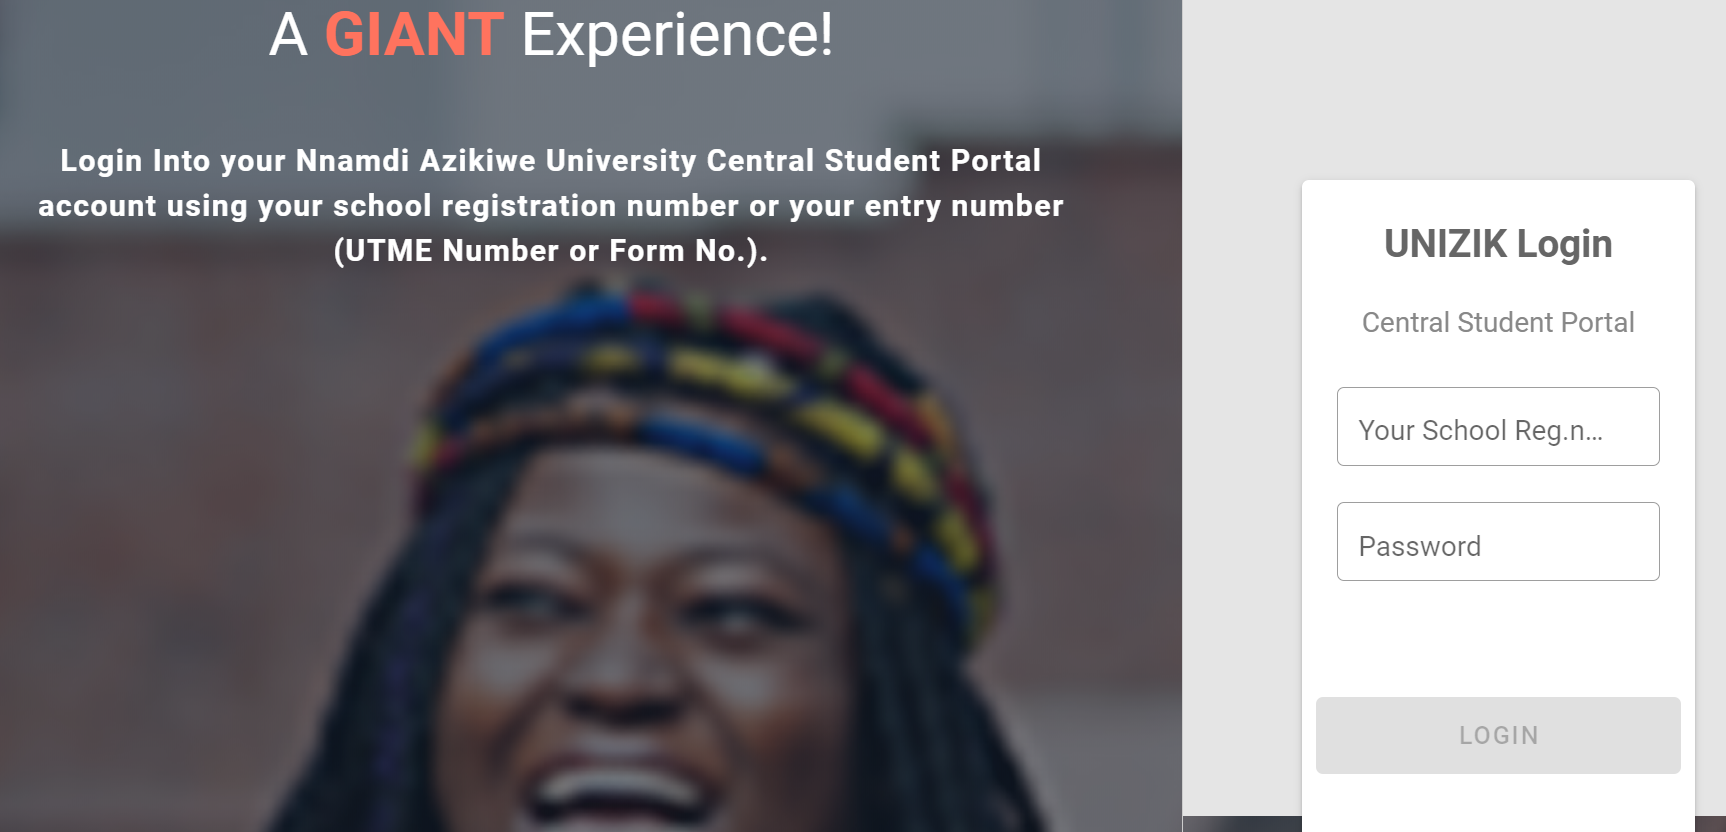 How to Login to UNIZIK Student Portal